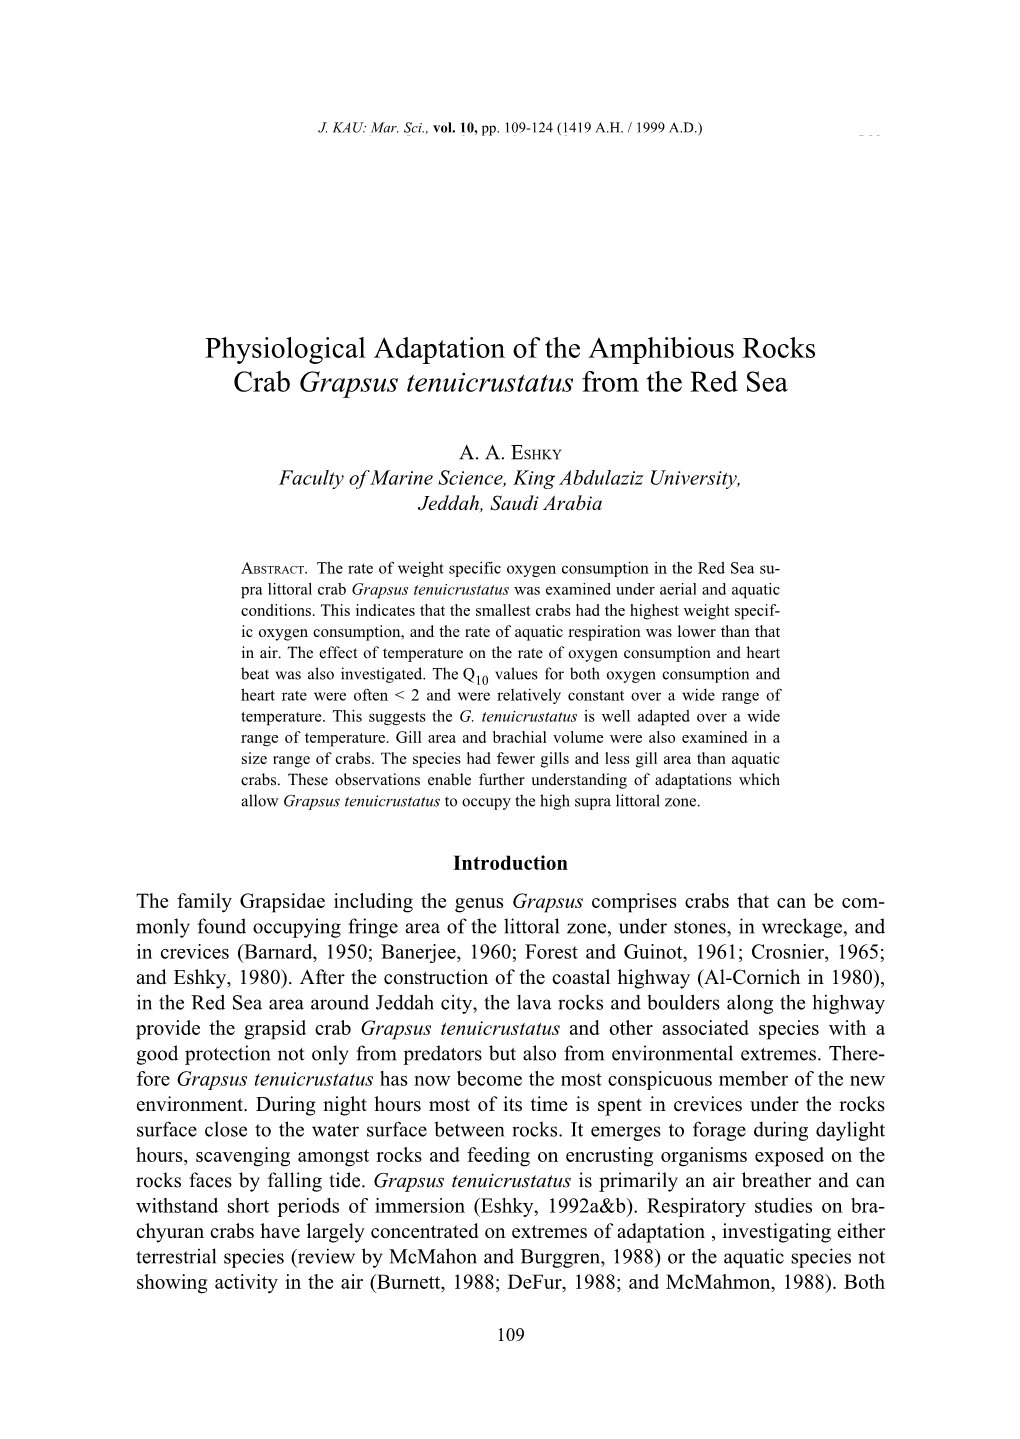 Physiological Adaptation of the Amphibious Rocks Crab Grapsus Tenuicrustatus from the Red Sea